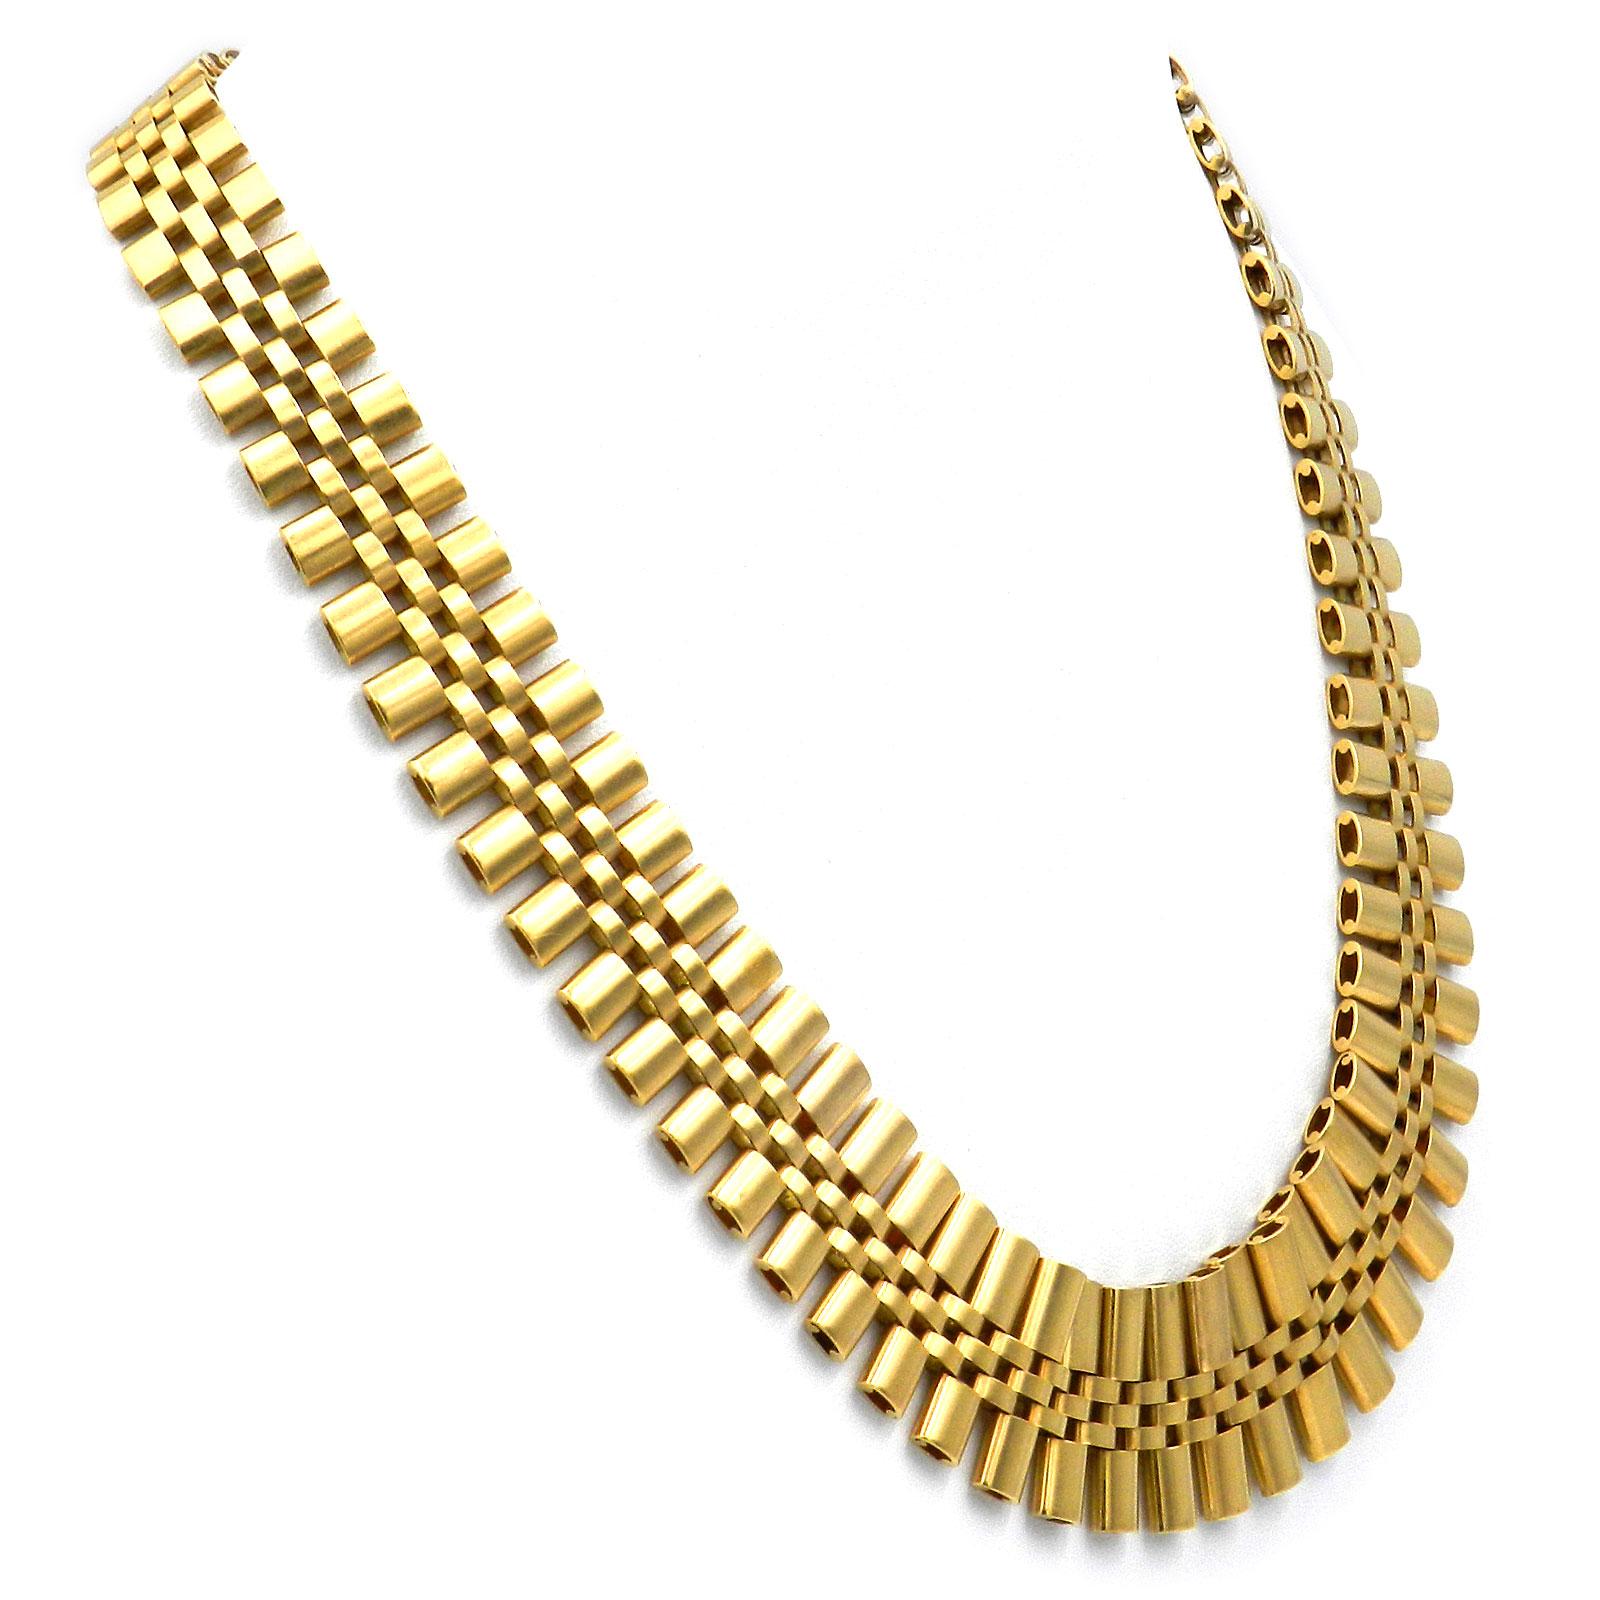 Retro 18K Gold Choker Necklace, circa 1960

Decorative choker necklace in the Etruscan style. The heavy, flat-fitting collar made of high-quality gold consists of individual links in a brick pattern. Like a flattering collar, the supple,